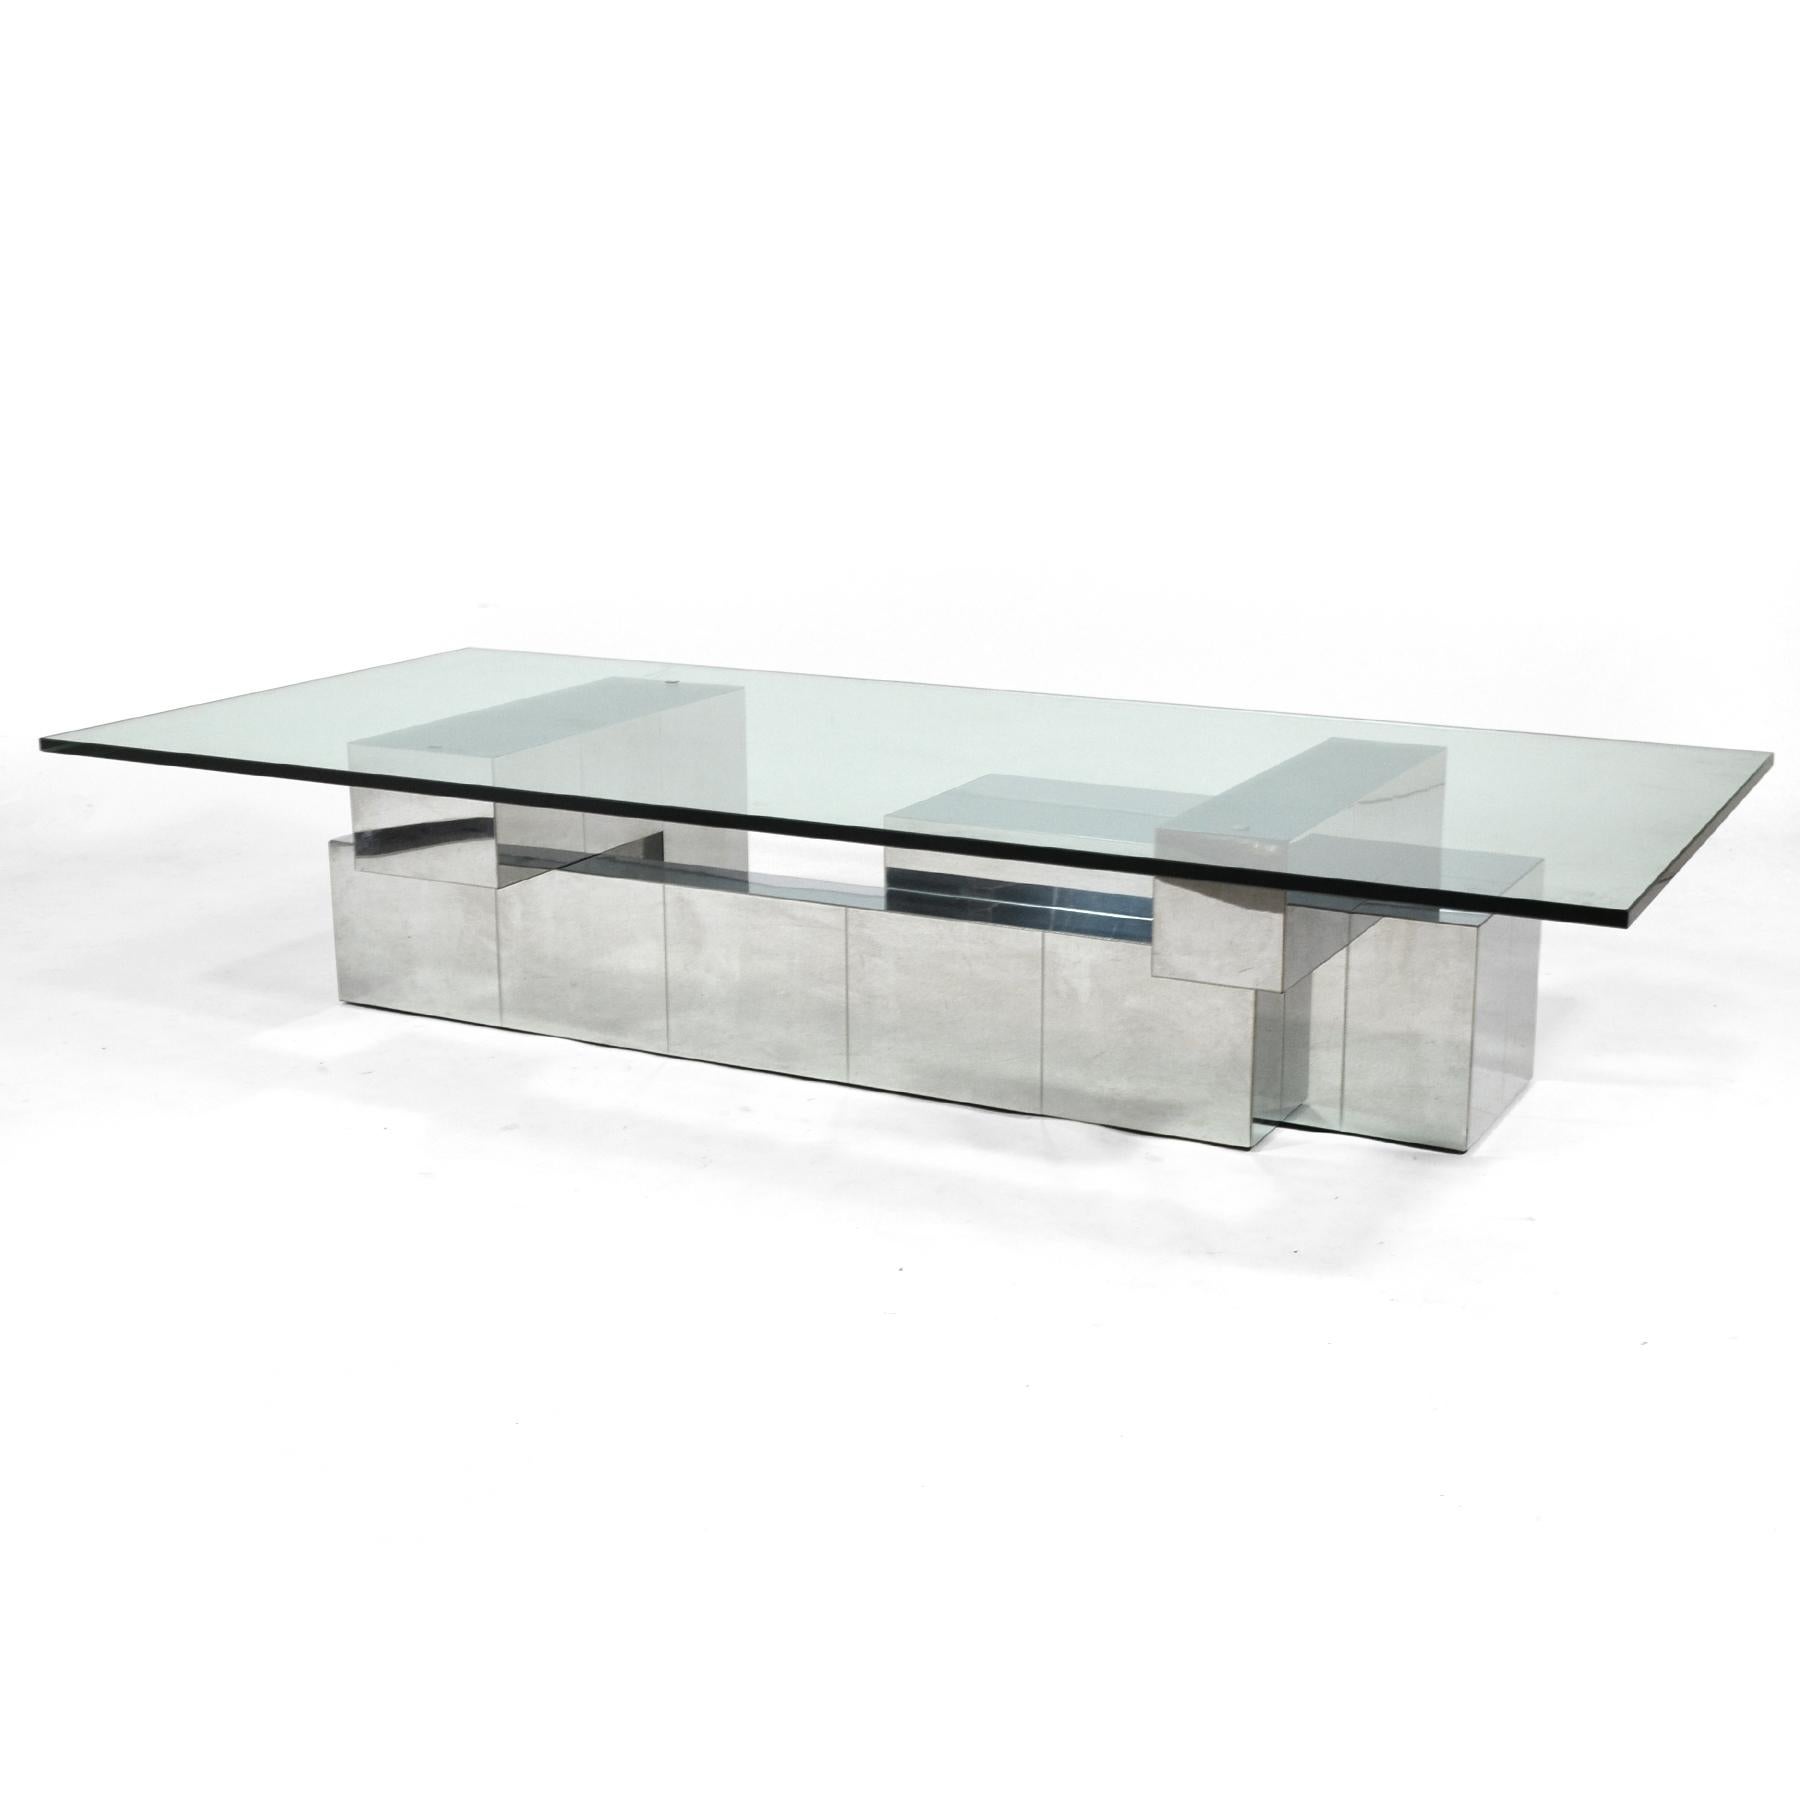 Plated Paul Evans Extra Large Cityscape Coffee Table... private listing